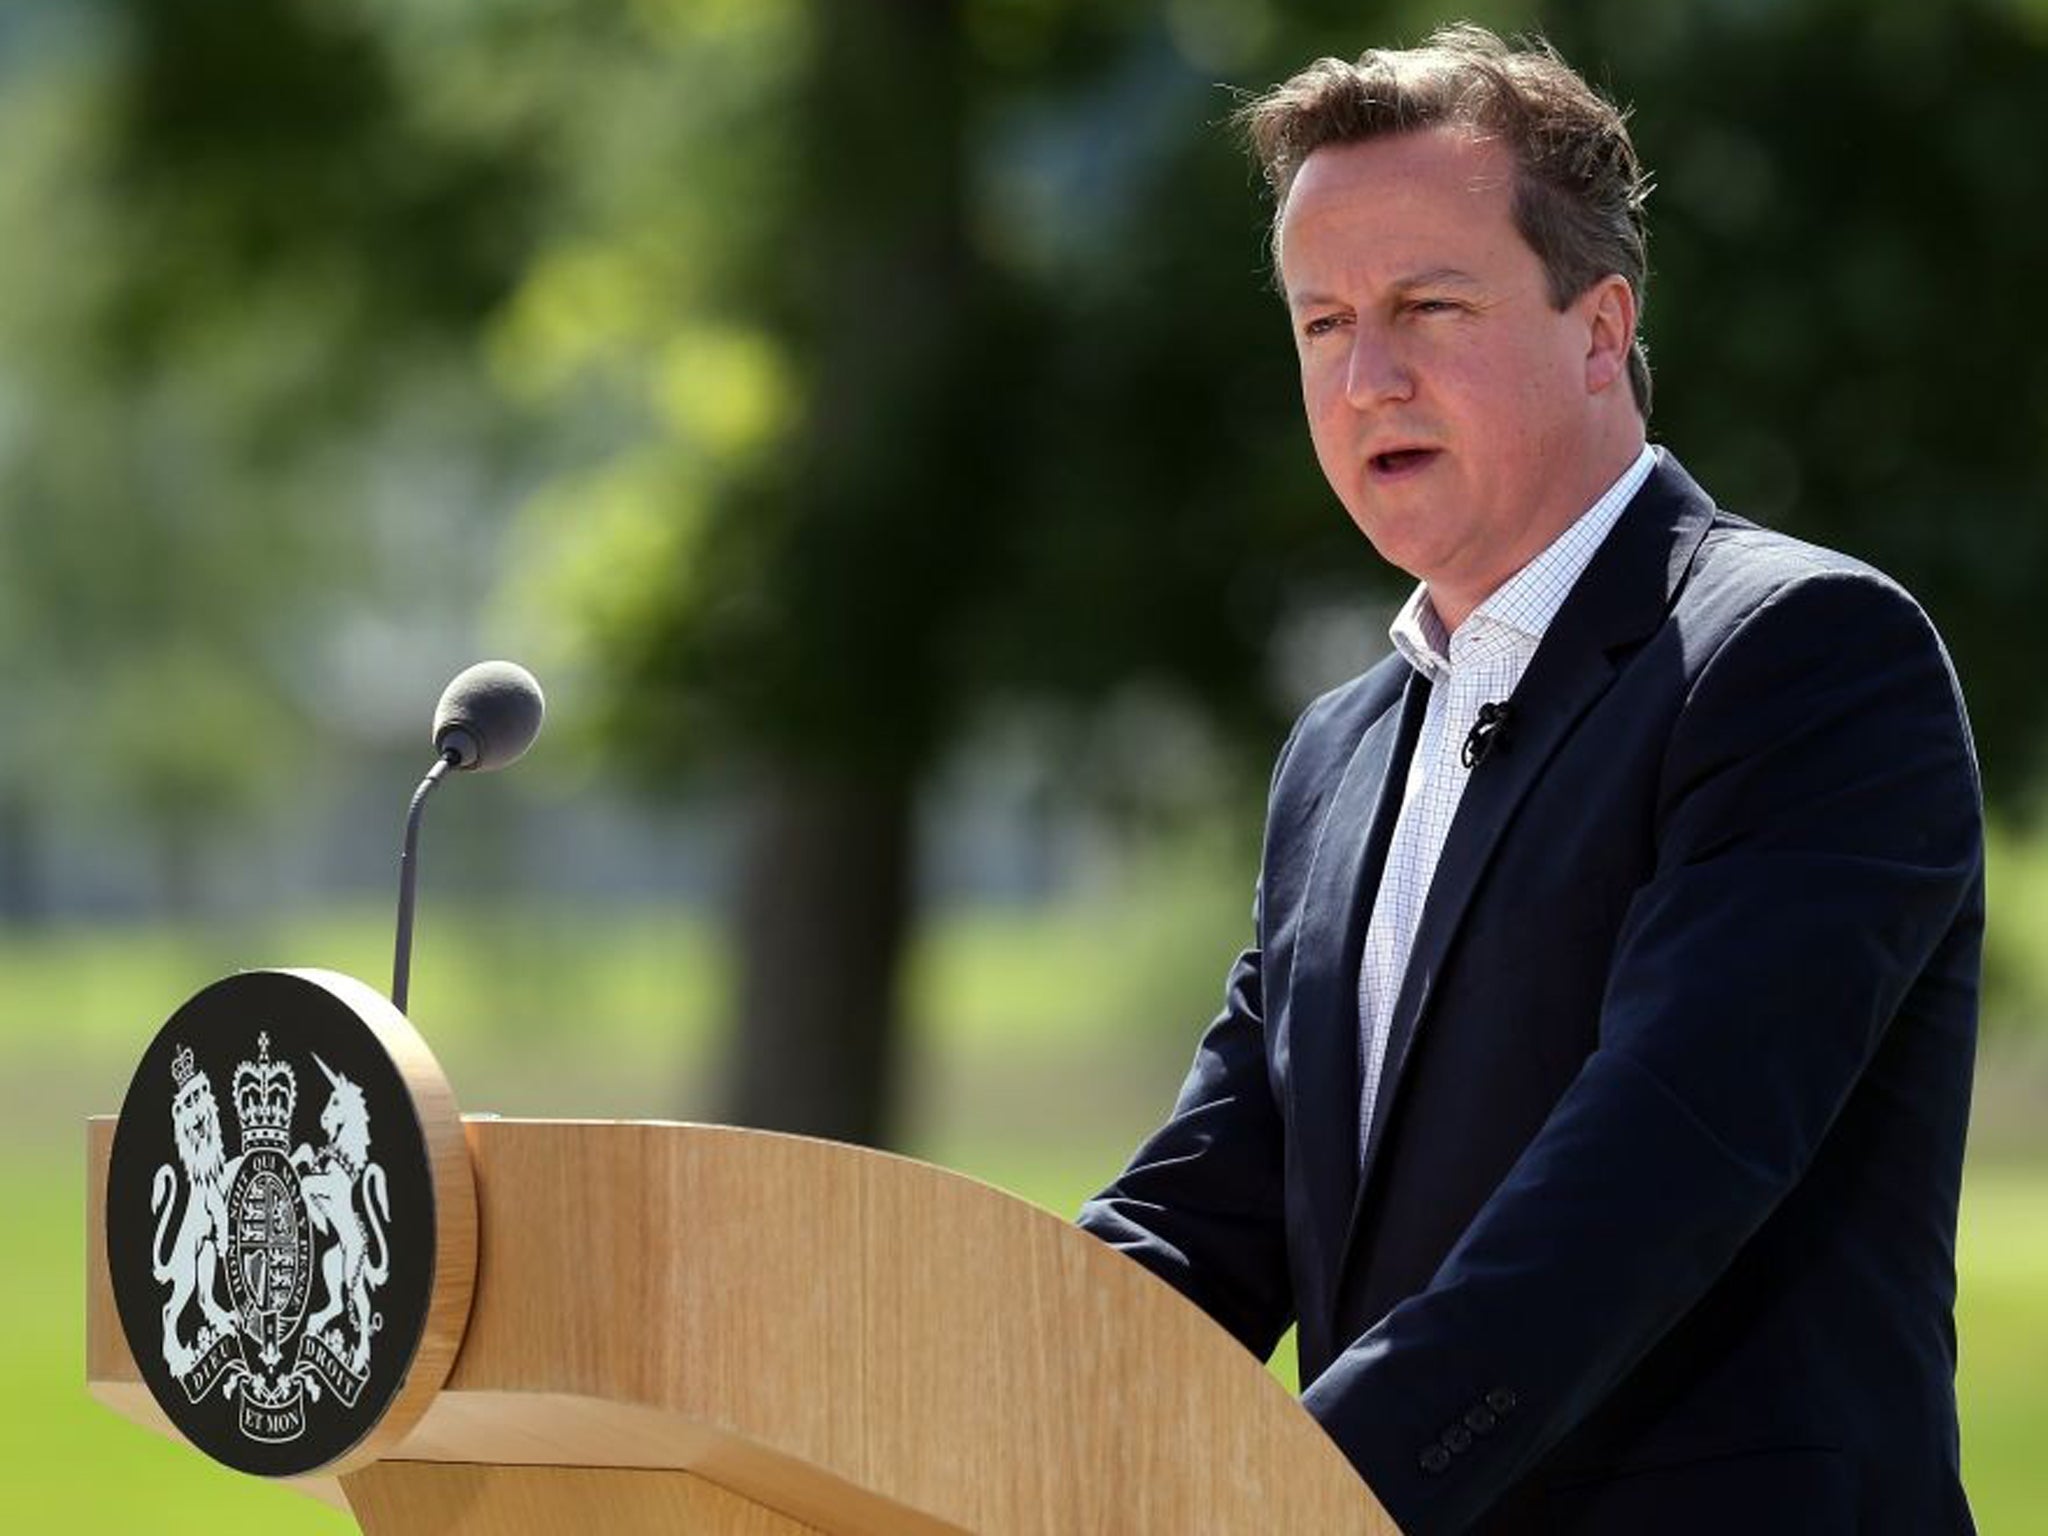 David Cameron said the agreement can 'rewrite the rules' on tax and transparency to benefit countries across the world